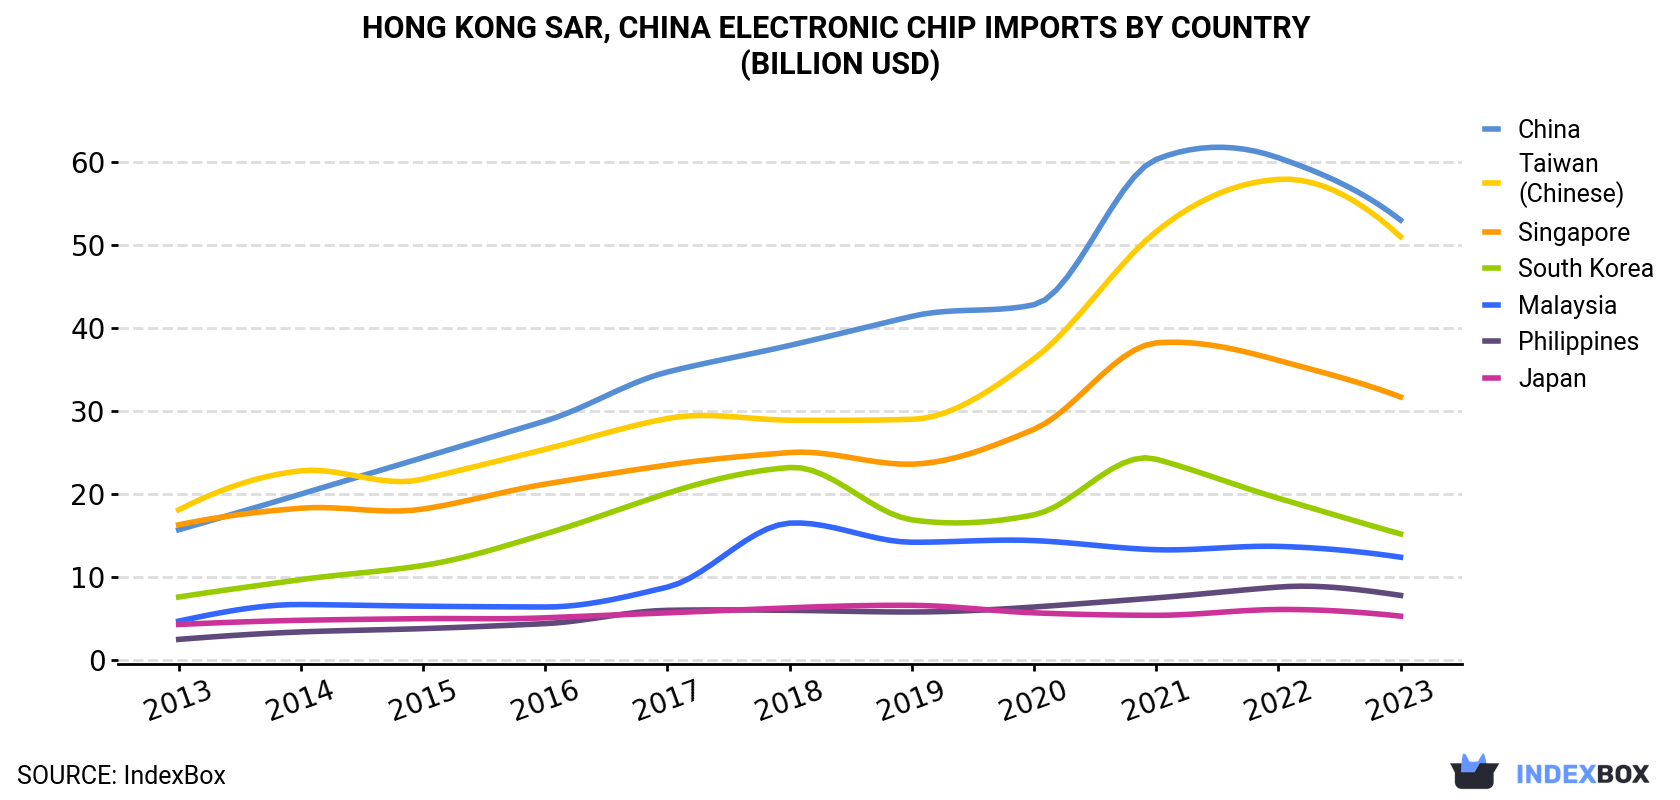 Hong Kong Electronic Chip Imports By Country (Billion USD)